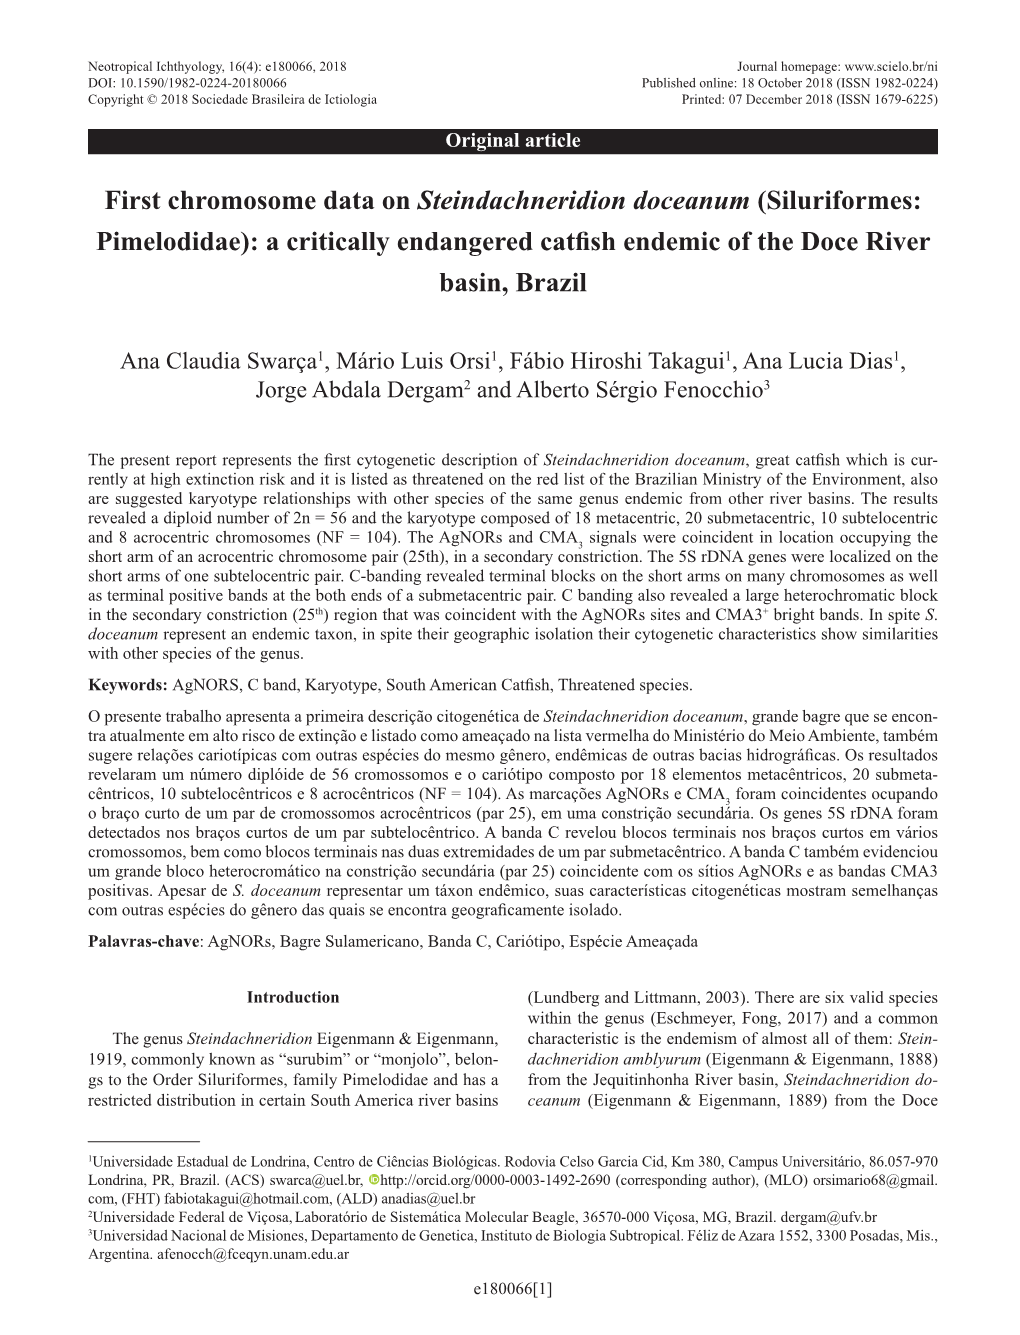 First Chromosome Data on Steindachneridion Doceanum (Siluriformes: Pimelodidae): a Critically Endangered Catfish Endemic of the Doce River Basin, Brazil